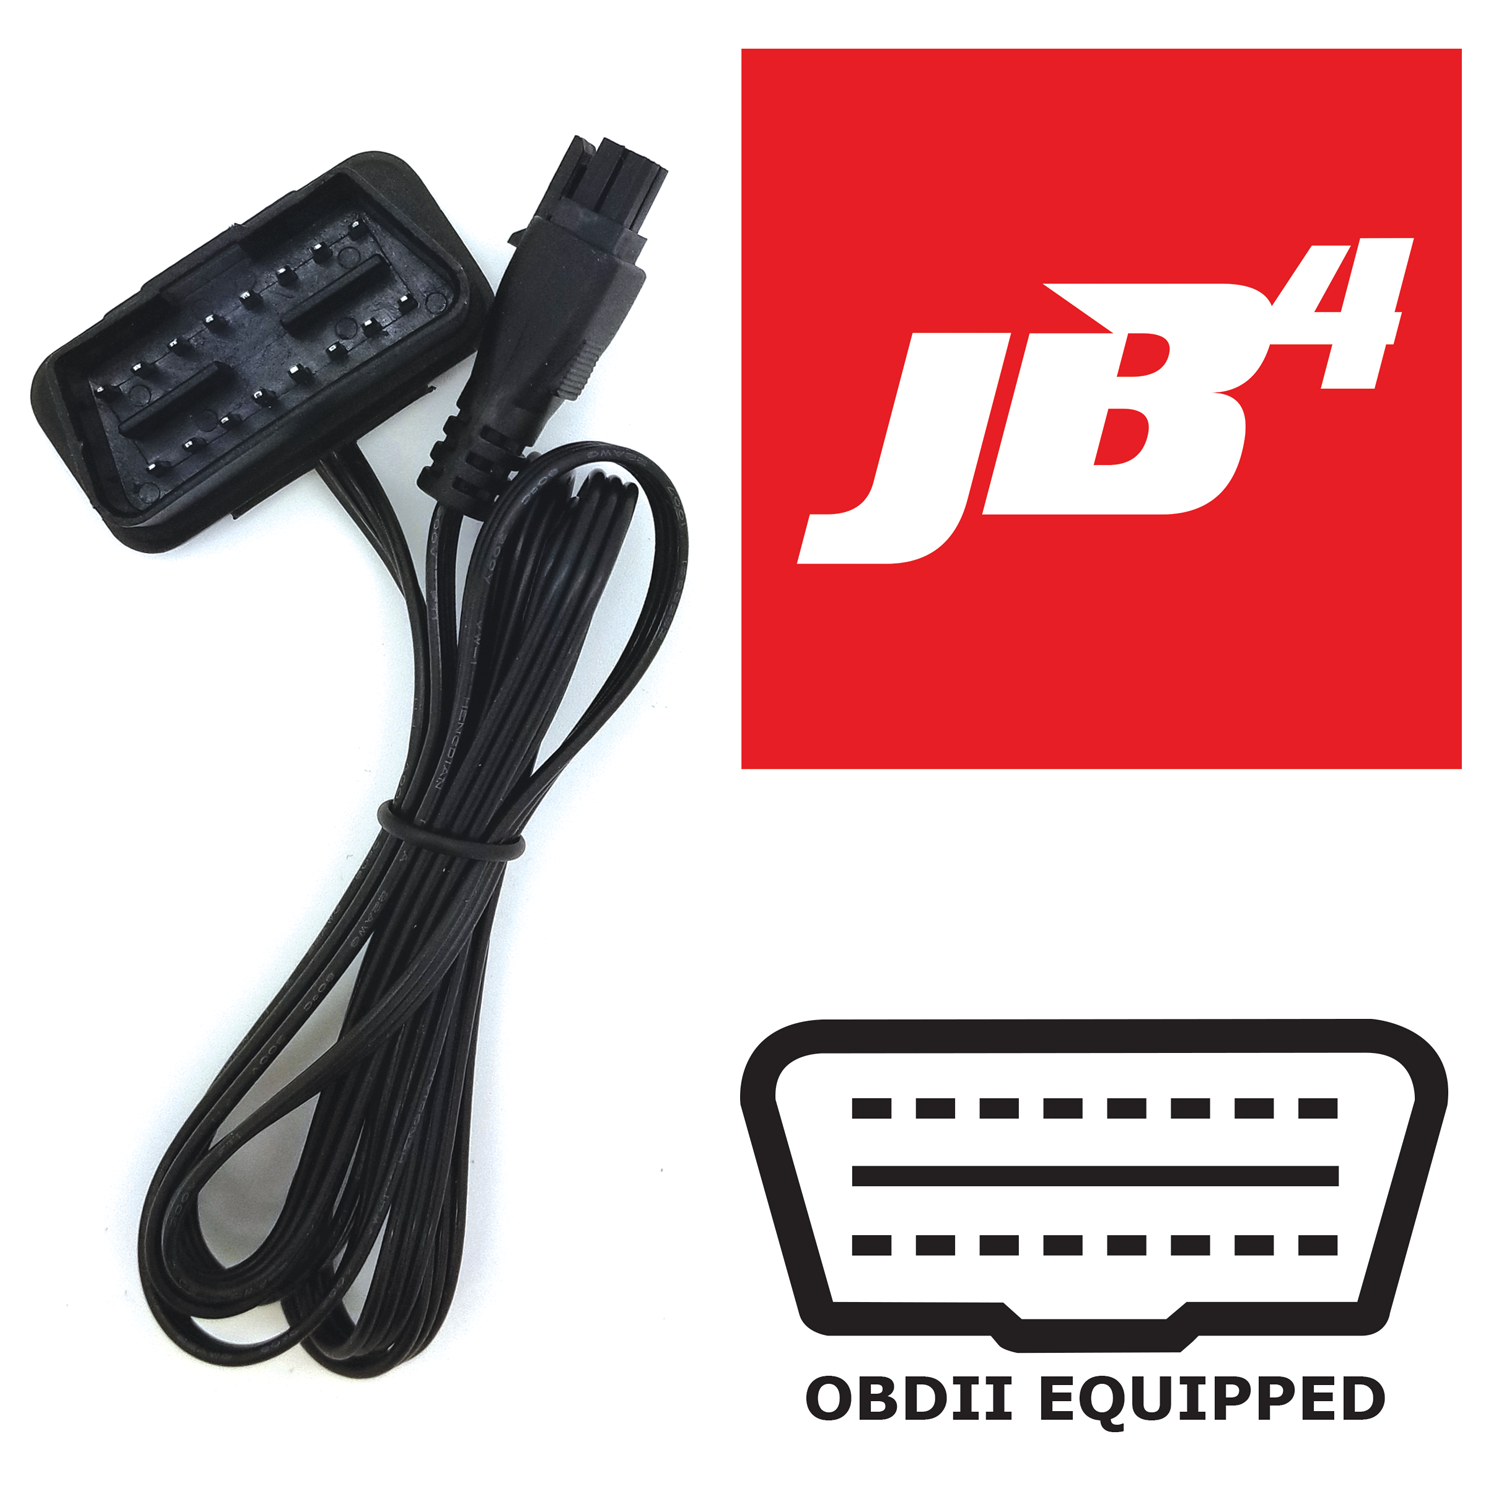 OBDII equipped jb4 tuner adapter